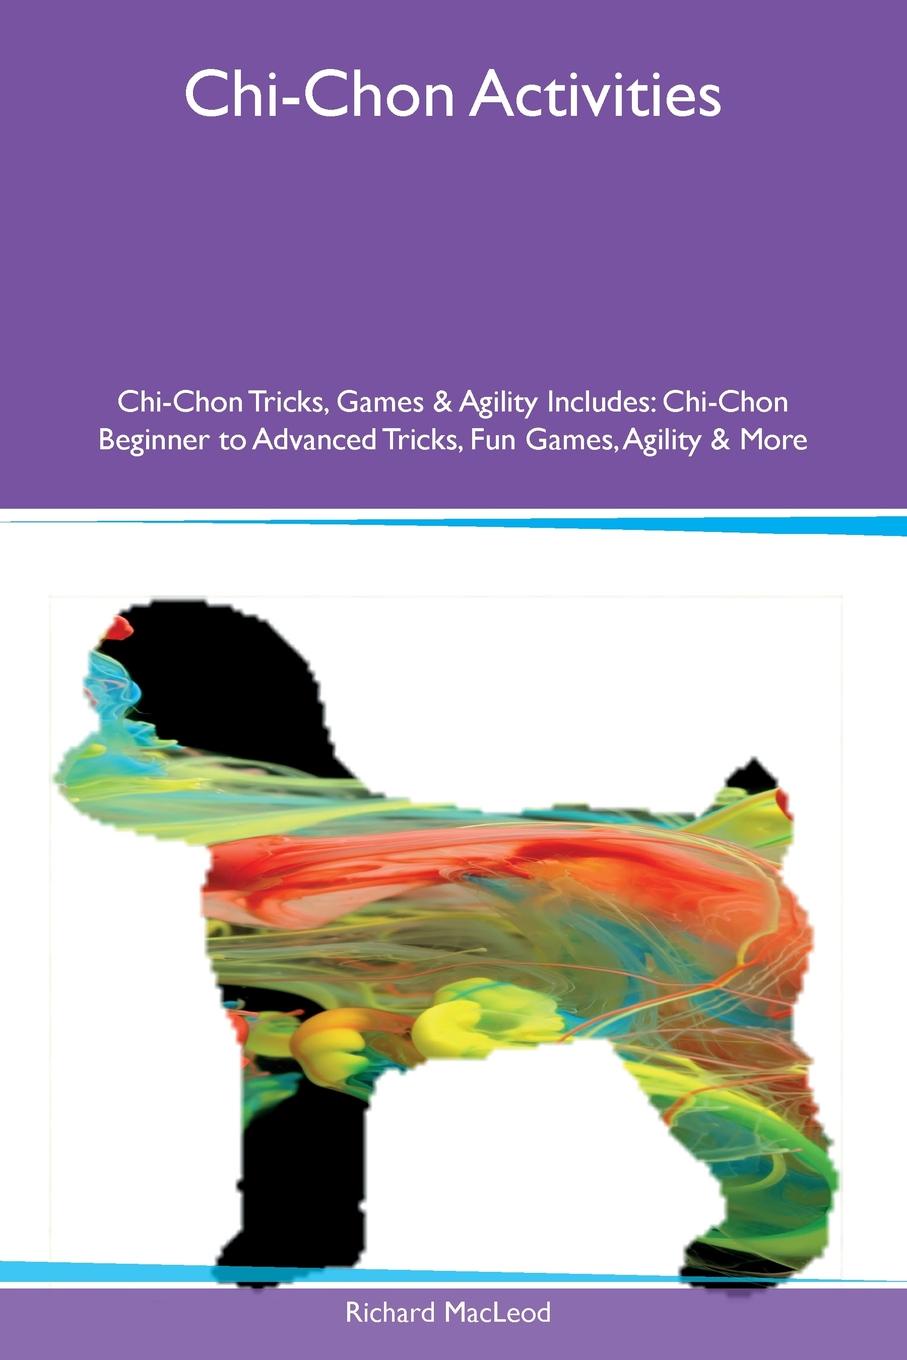 Chi-Chon Activities Chi-Chon Tricks, Games & Agility Includes. Chi-Chon Beginner to Advanced Tricks, Fun Games, Agility & More